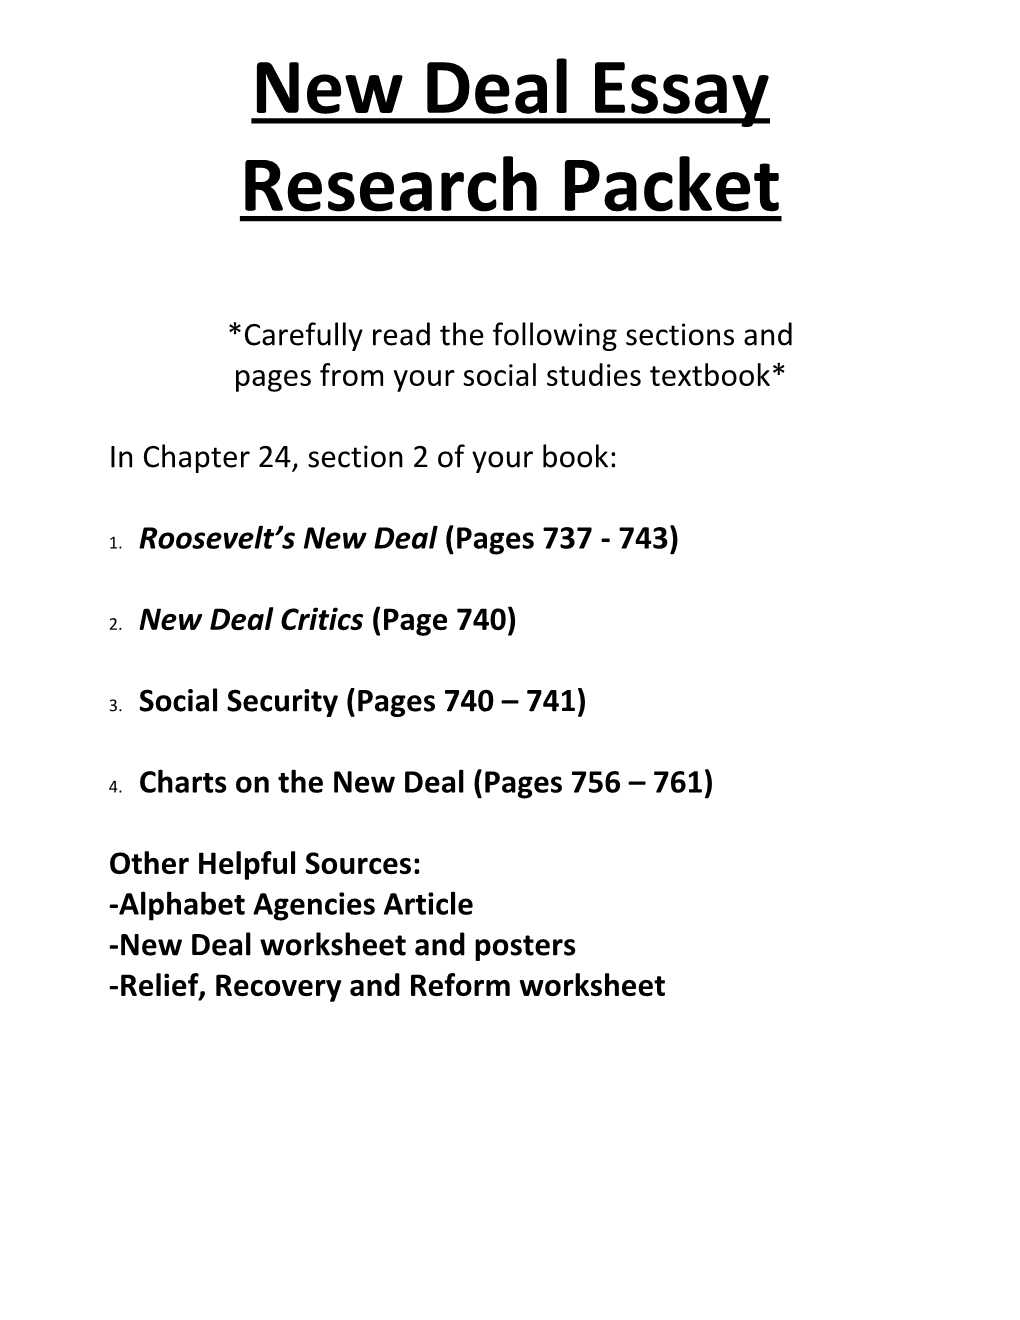 New Deal Essay Research Packet